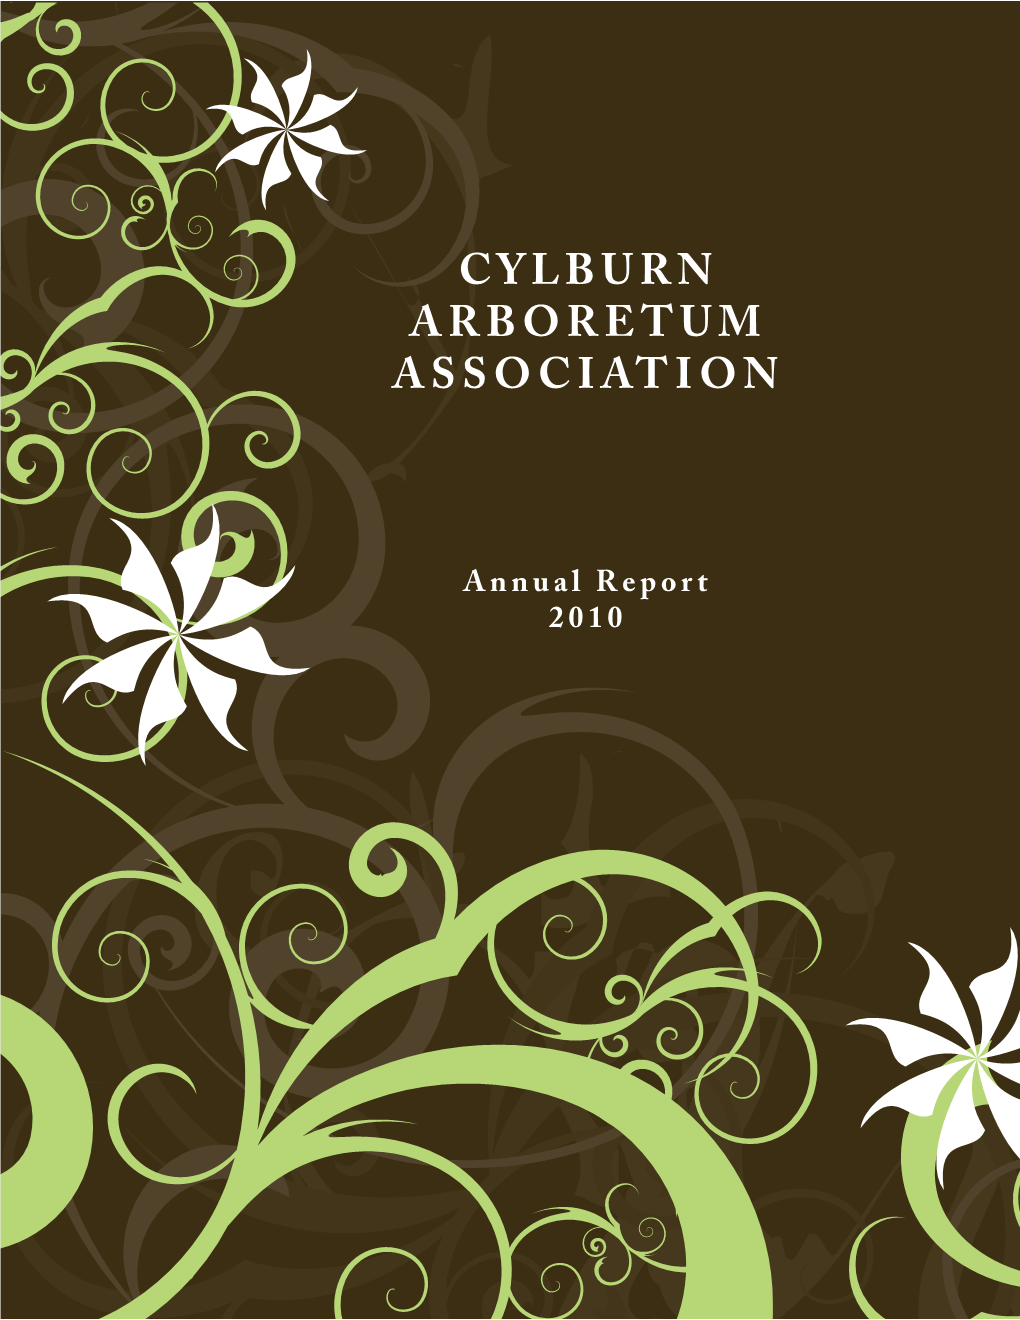 CYLBURN ARBORETUM ASSOCIATION 2010: Continuing Traditions – Celebrating New Directions